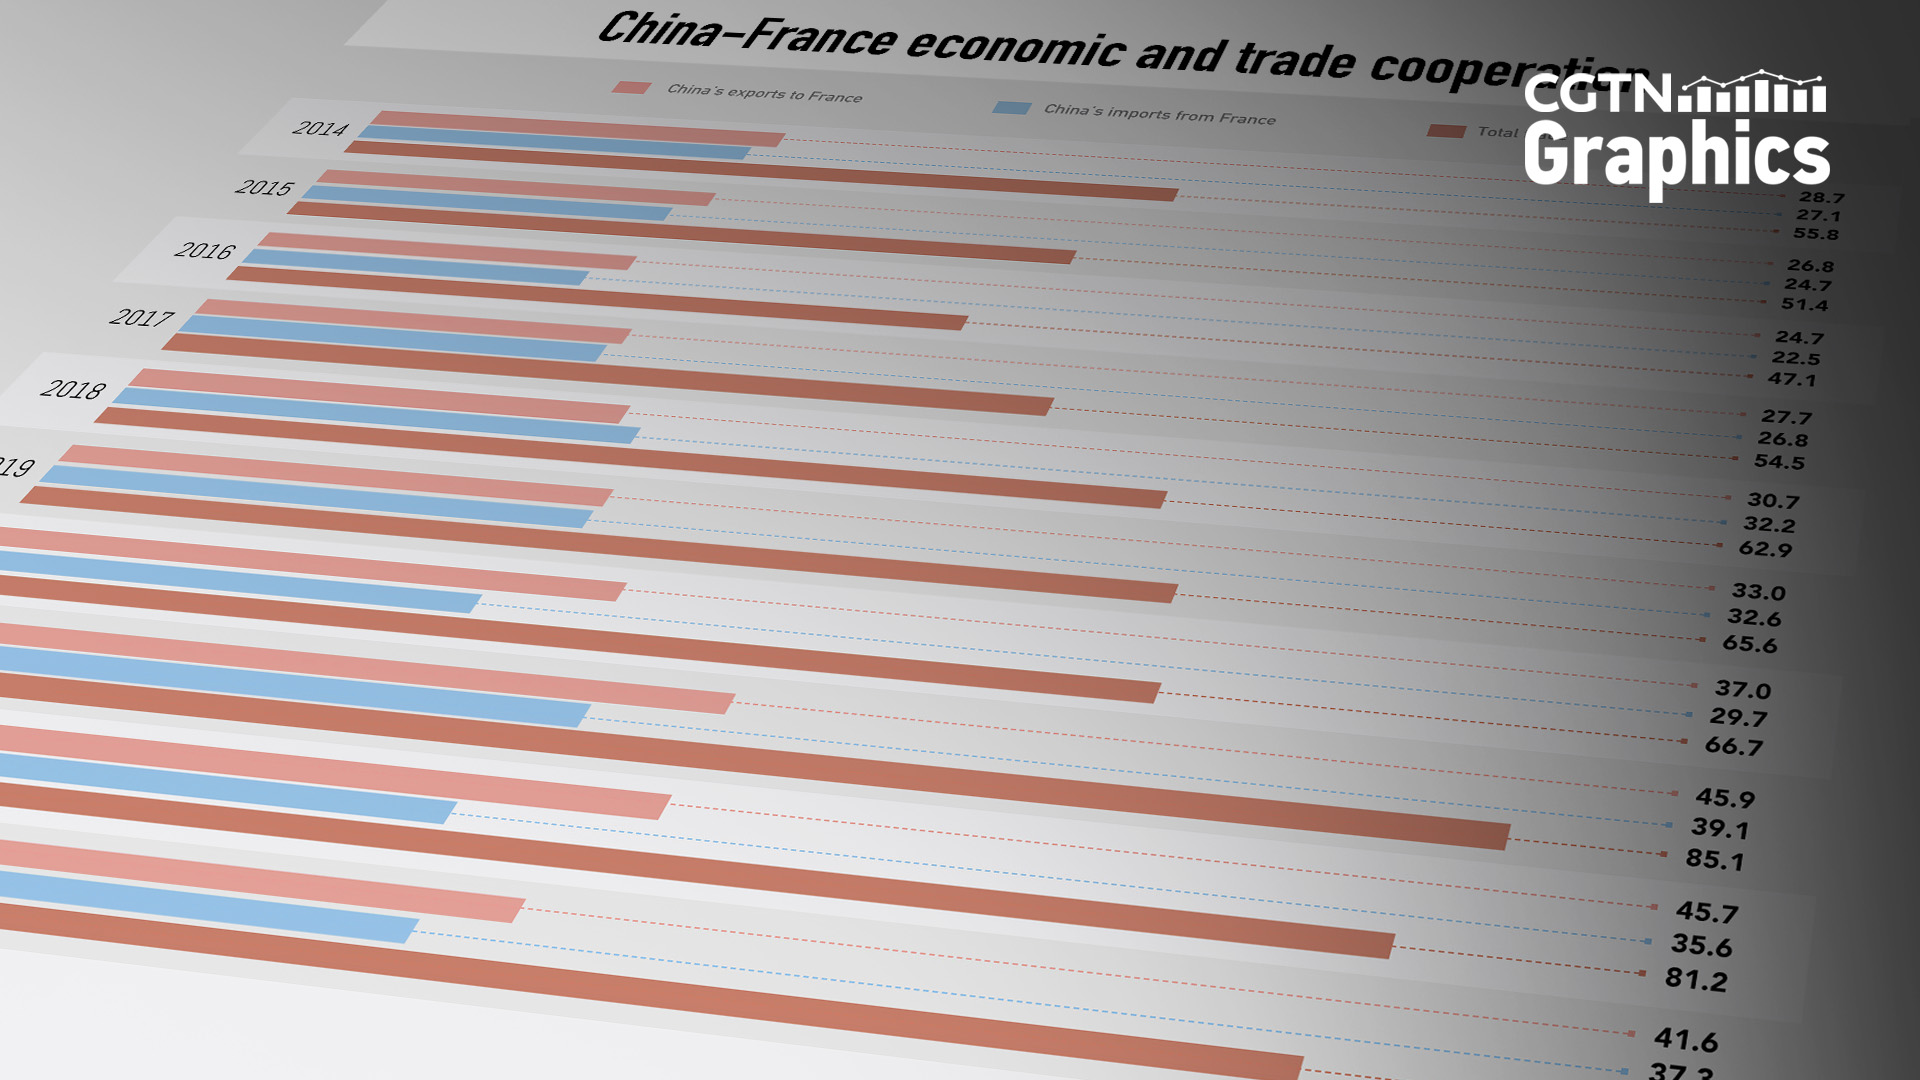 Graphics: China-France economic and trade cooperation full of opportunities